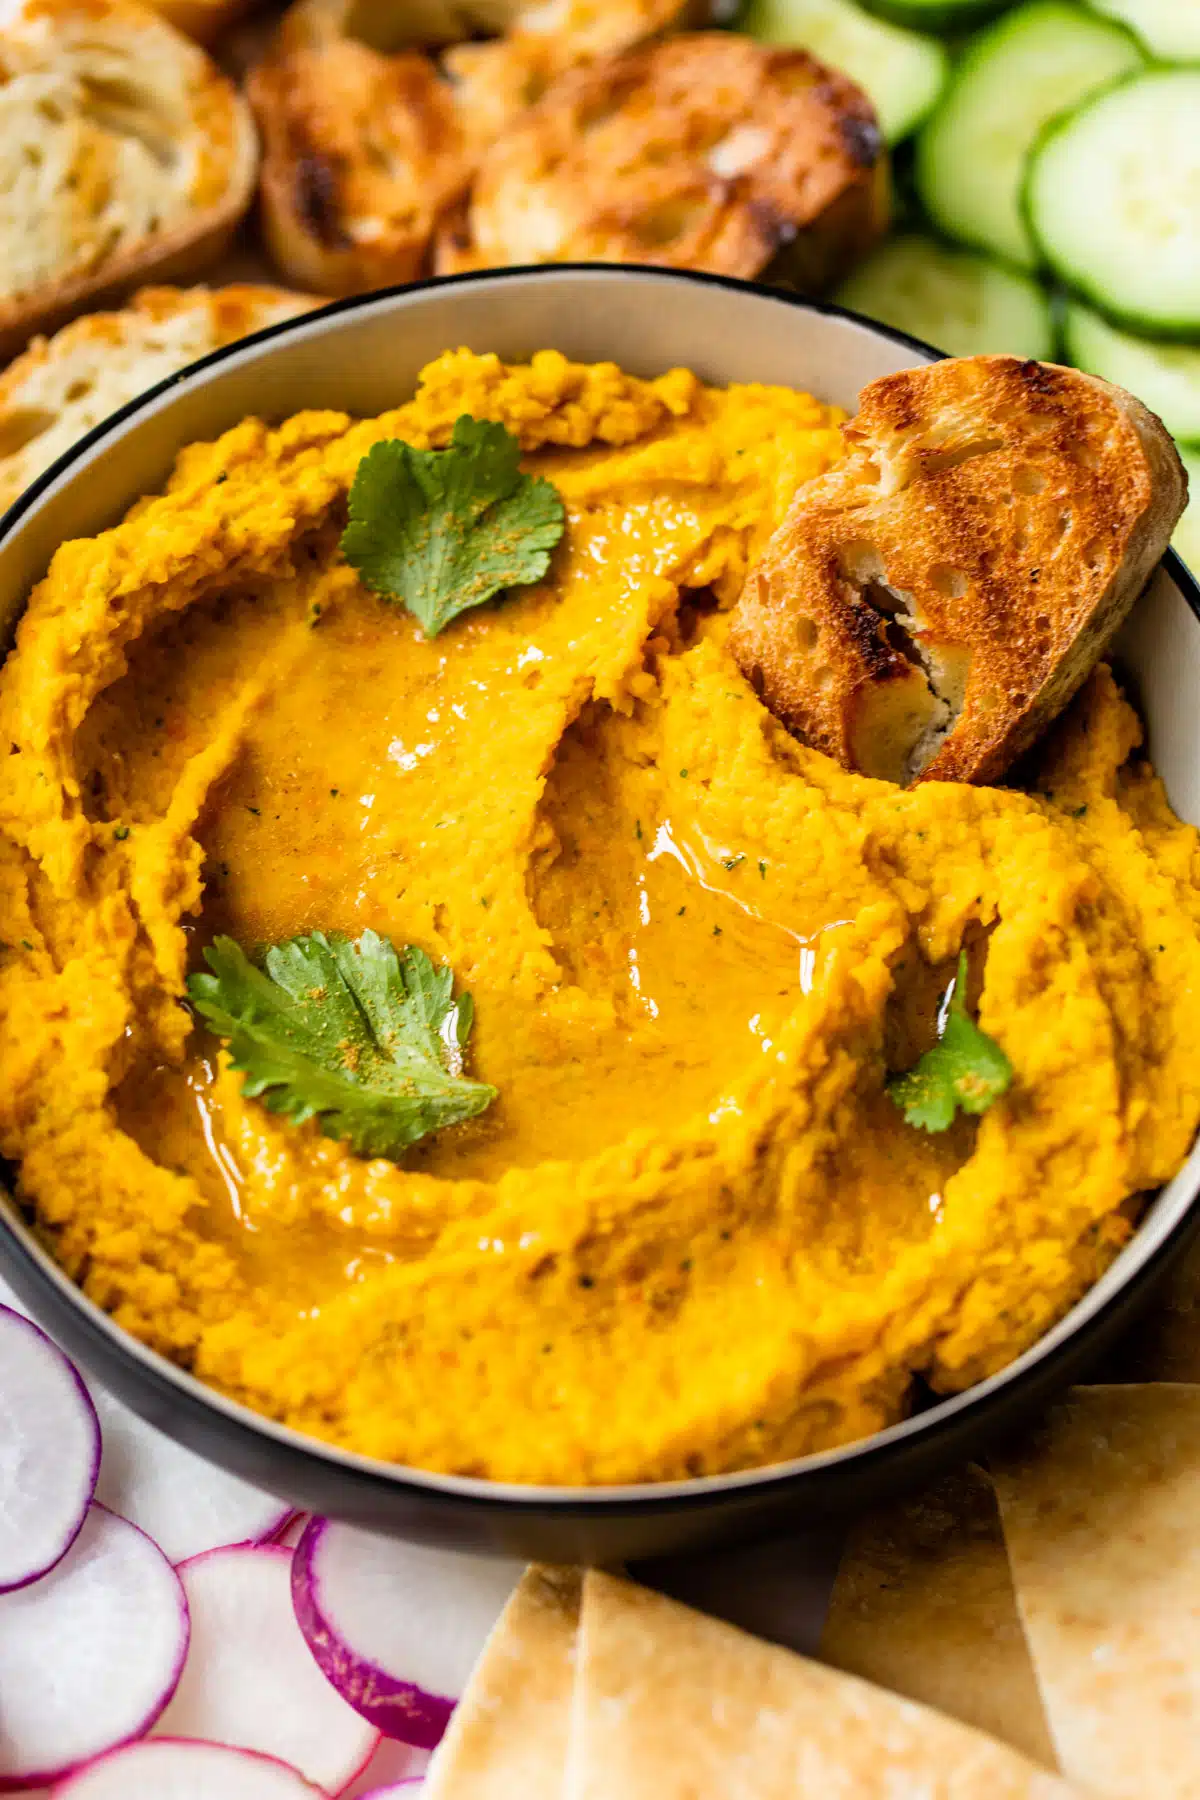 carrots hummus in a bowl with a slice of bread